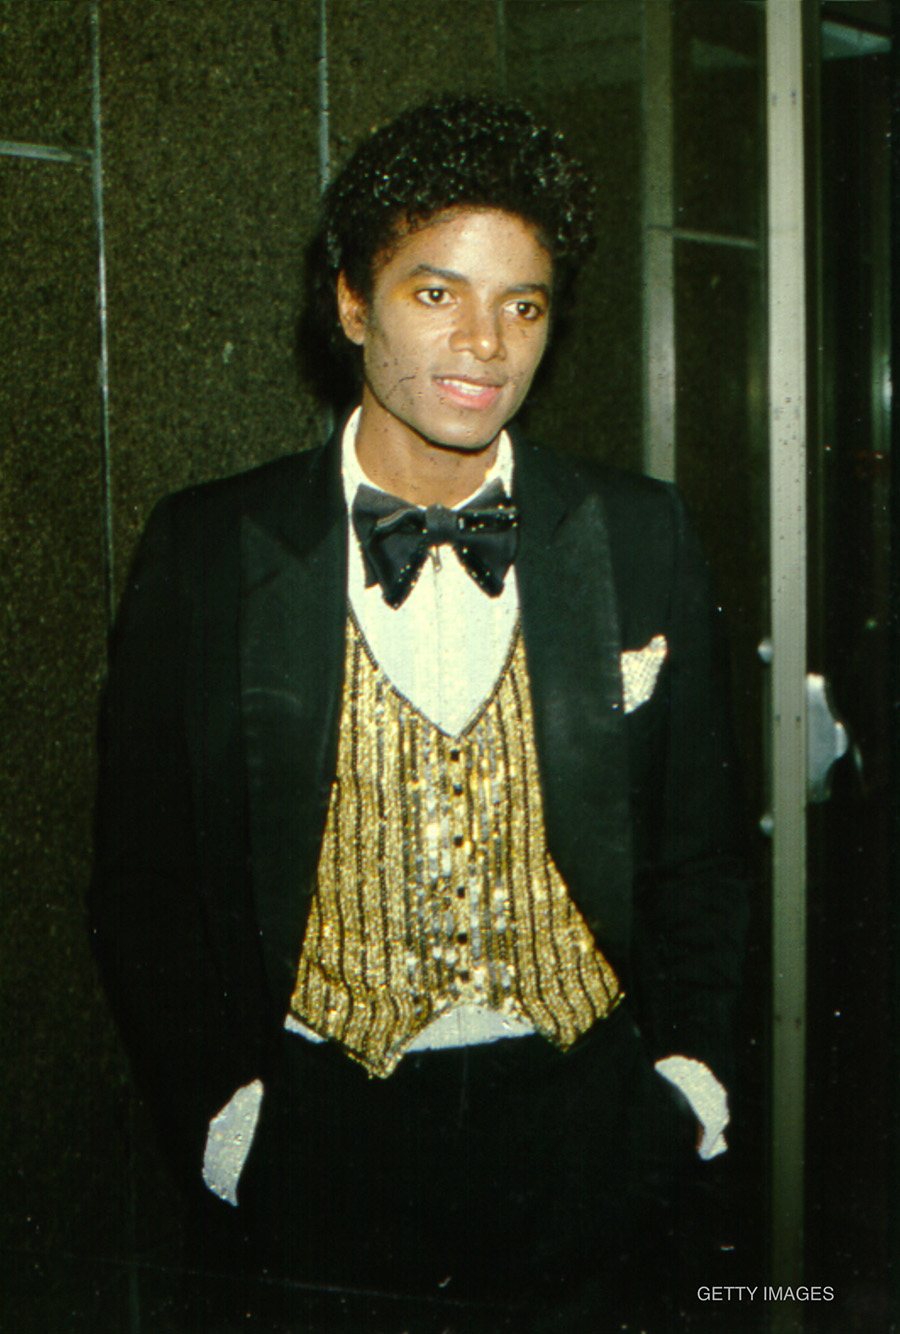 Michael Jackson at the charity concert "Because We Care" in January 1980.